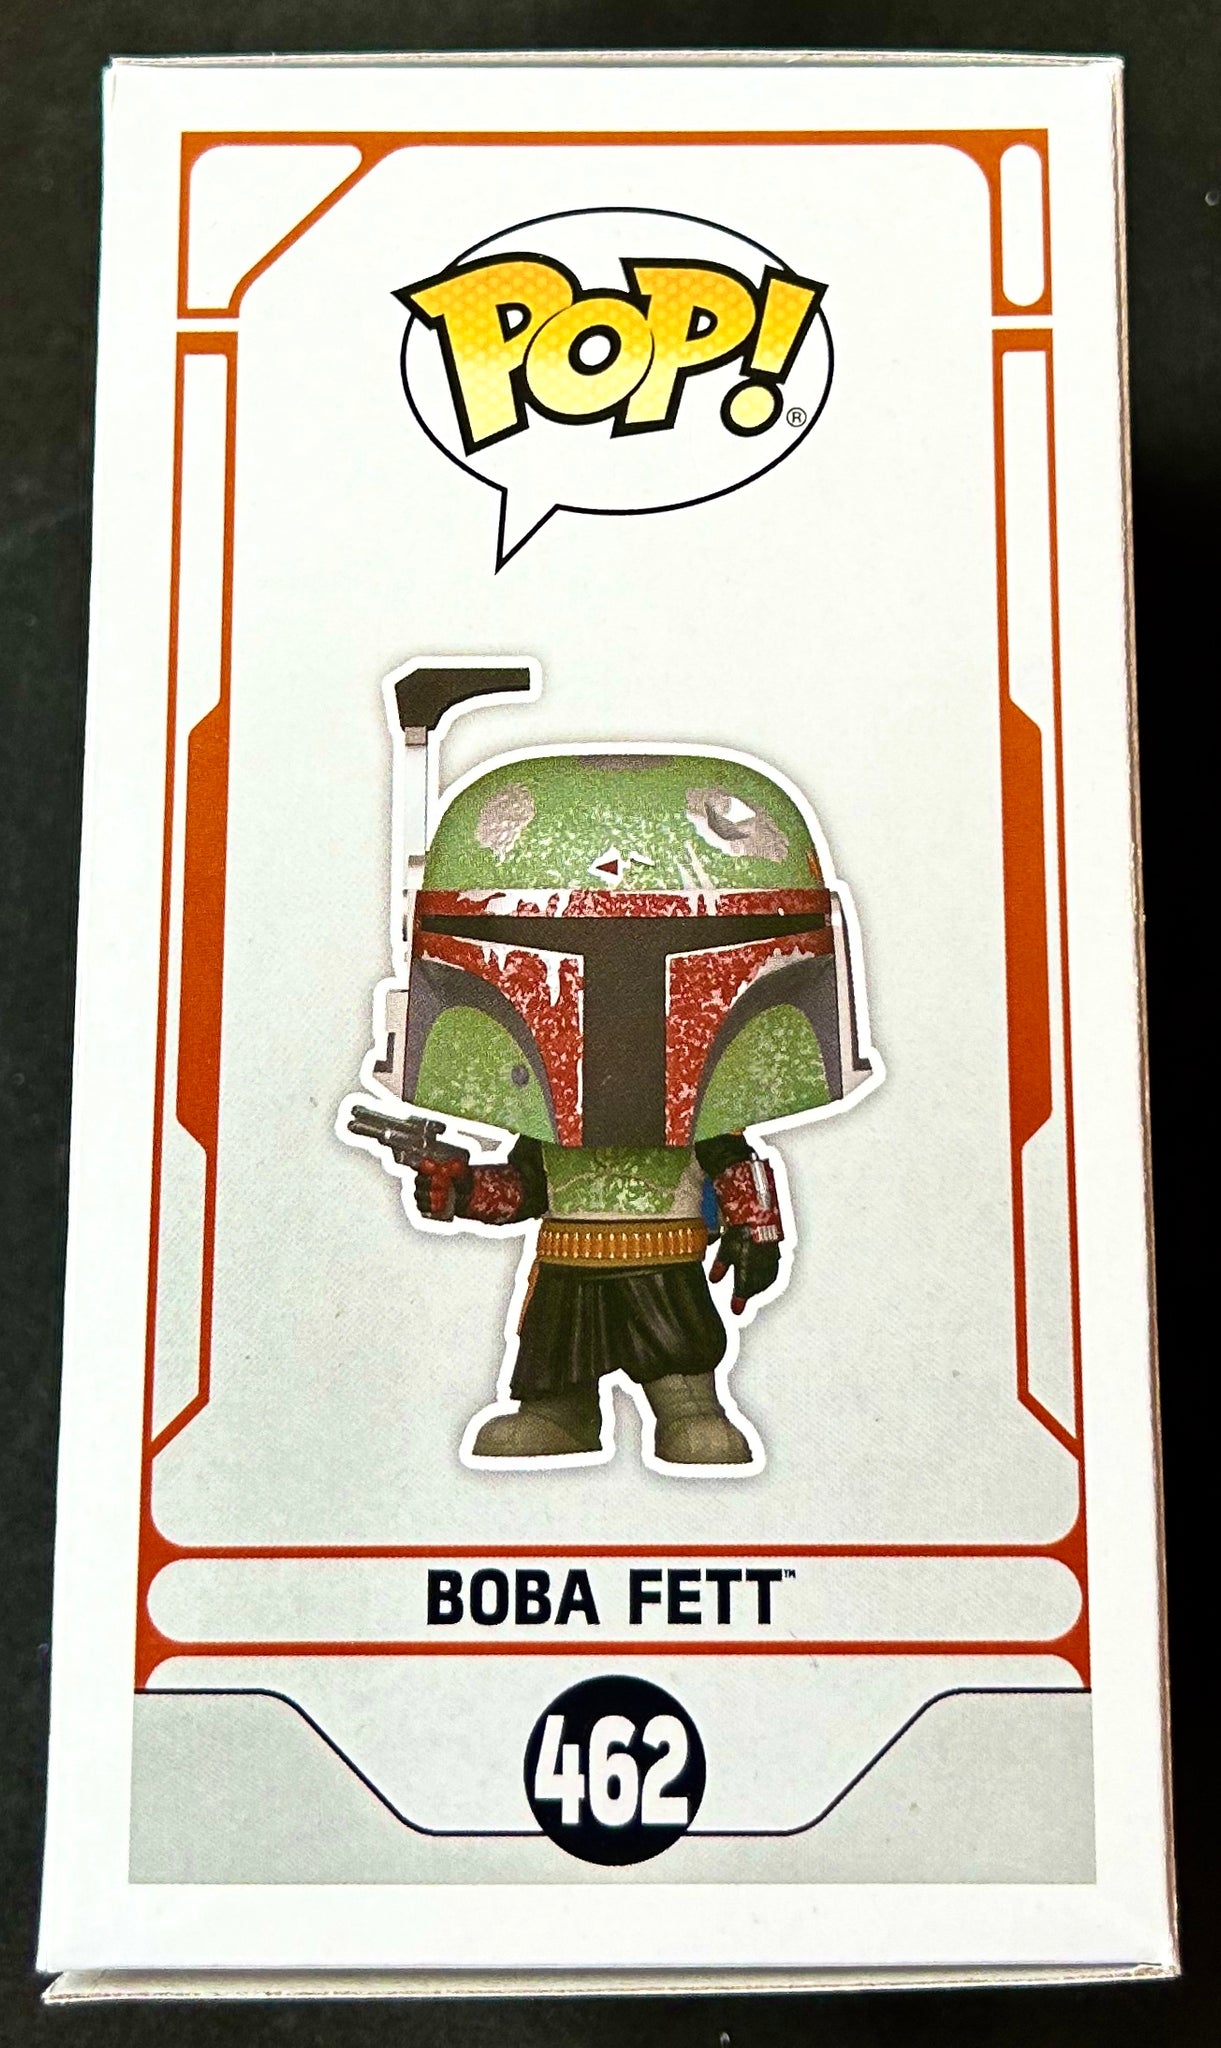 Star Wars Boba Fett 462 Funko POP! with Hand Painted Sketch and Eclectic Double Layer Authenticity